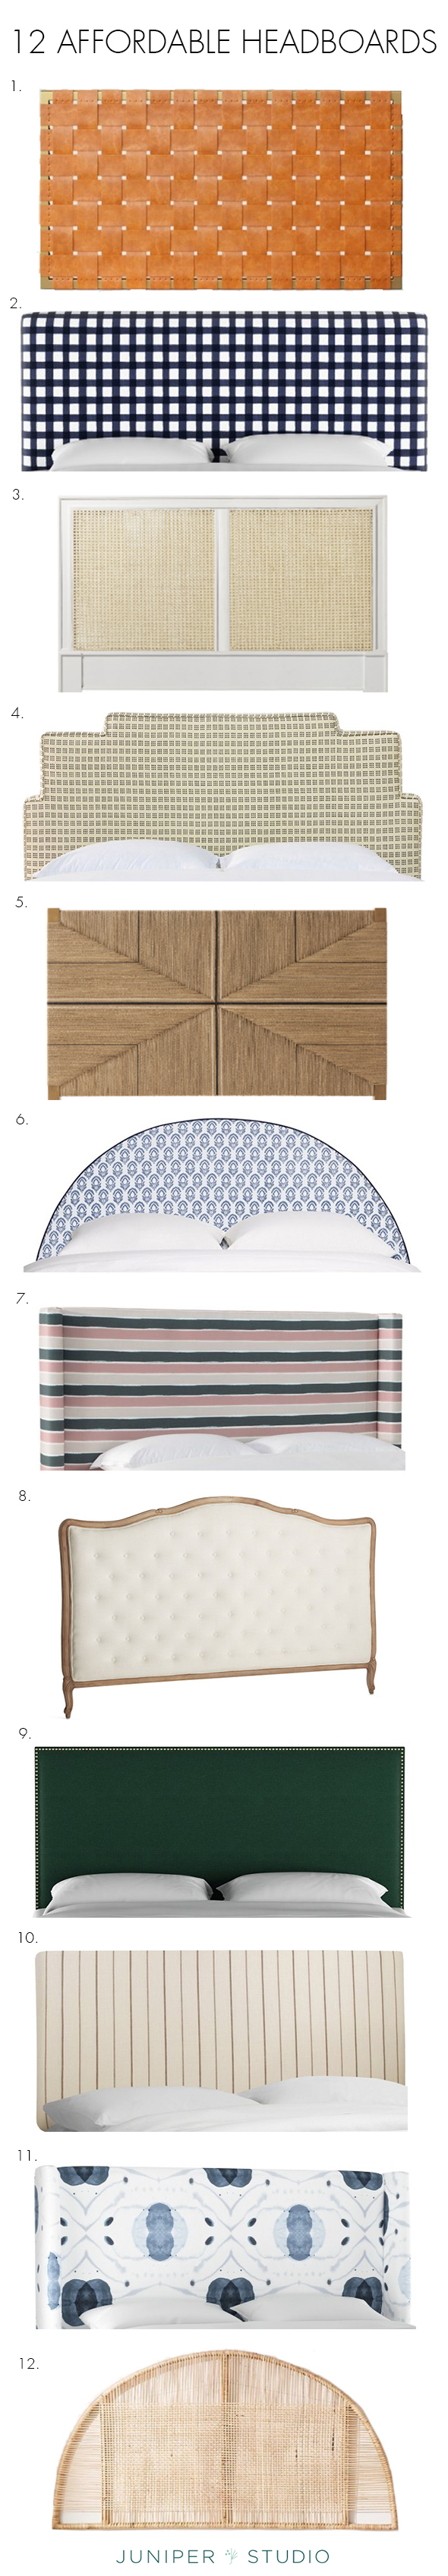 12 affordable headboard roundup